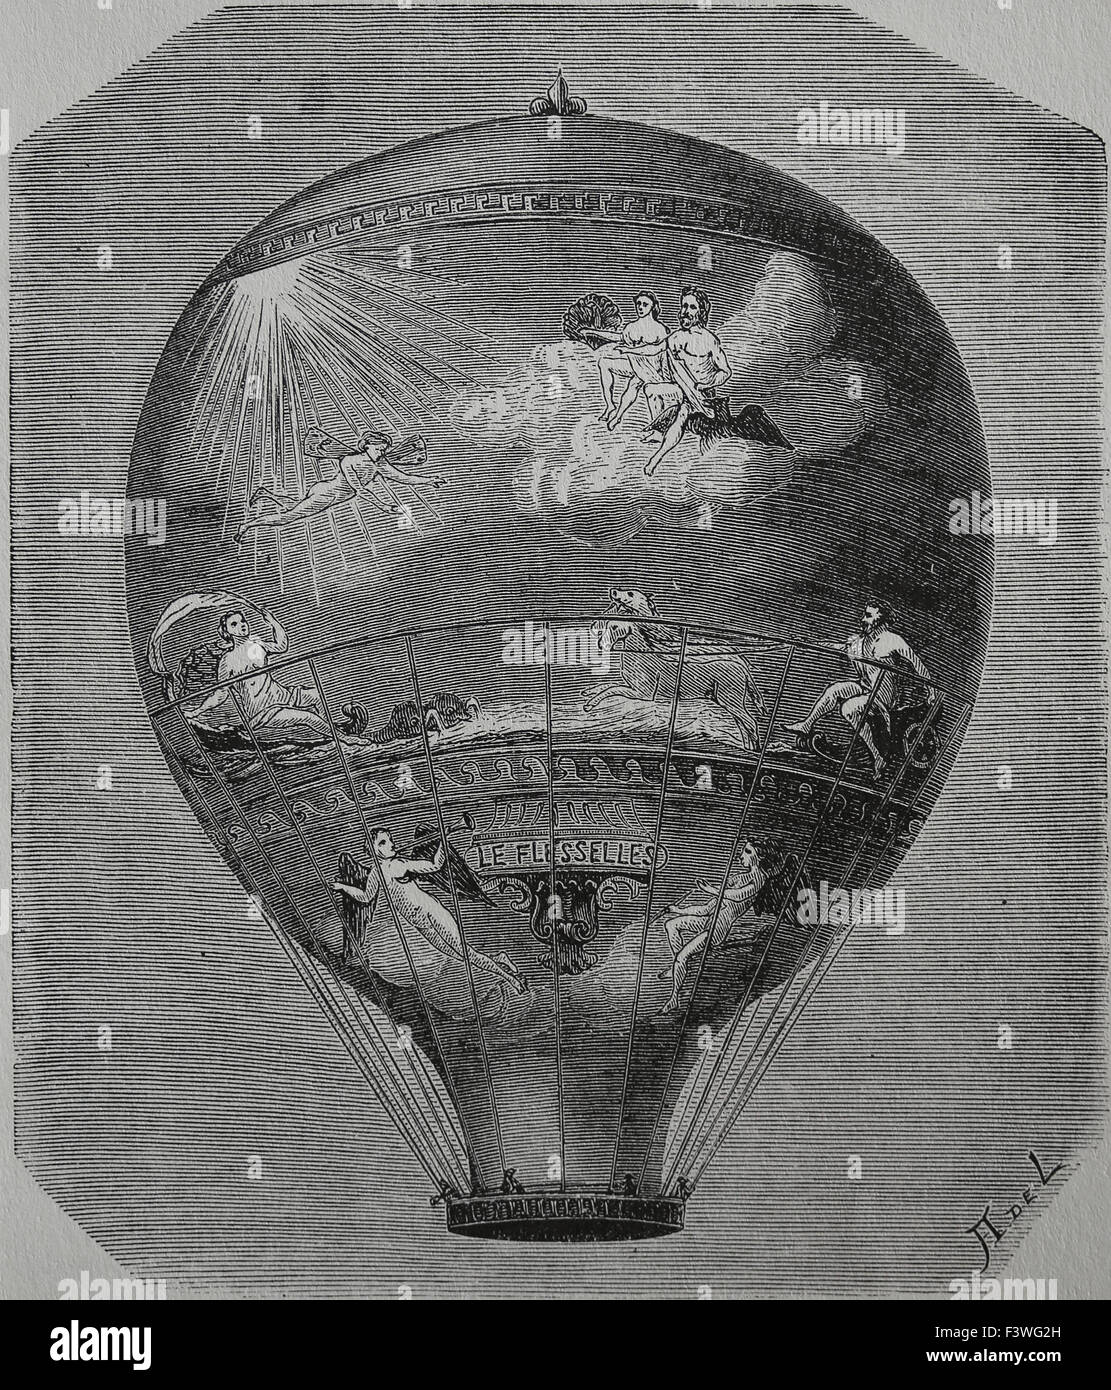 Early hot air balloon flight. This balloon Le Flesselles ascended over Lyon France on 1 January 1784. Stock Photo